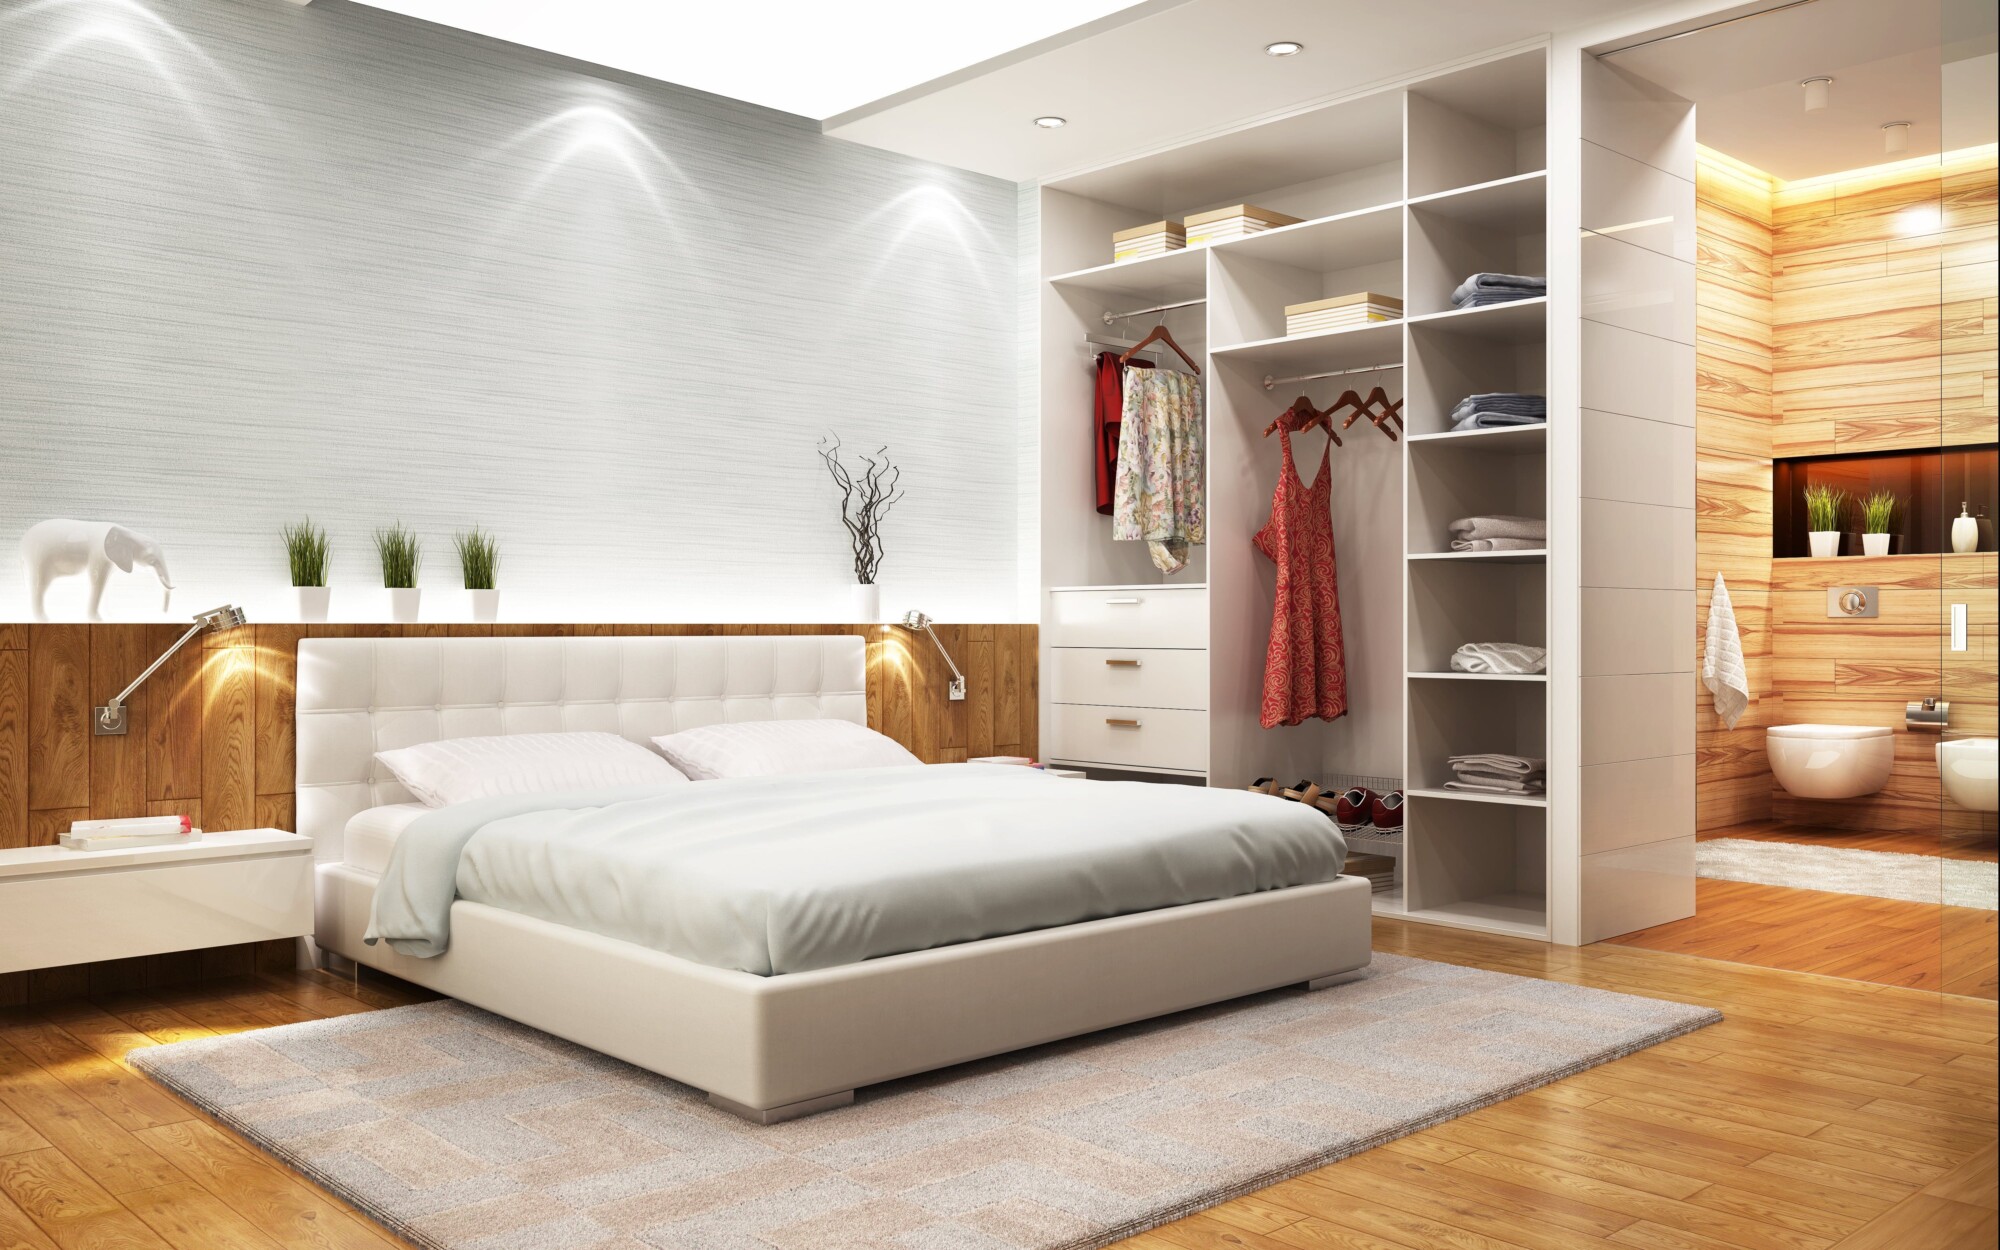 bespoke bedroom design with fitted wardrobes and storage space